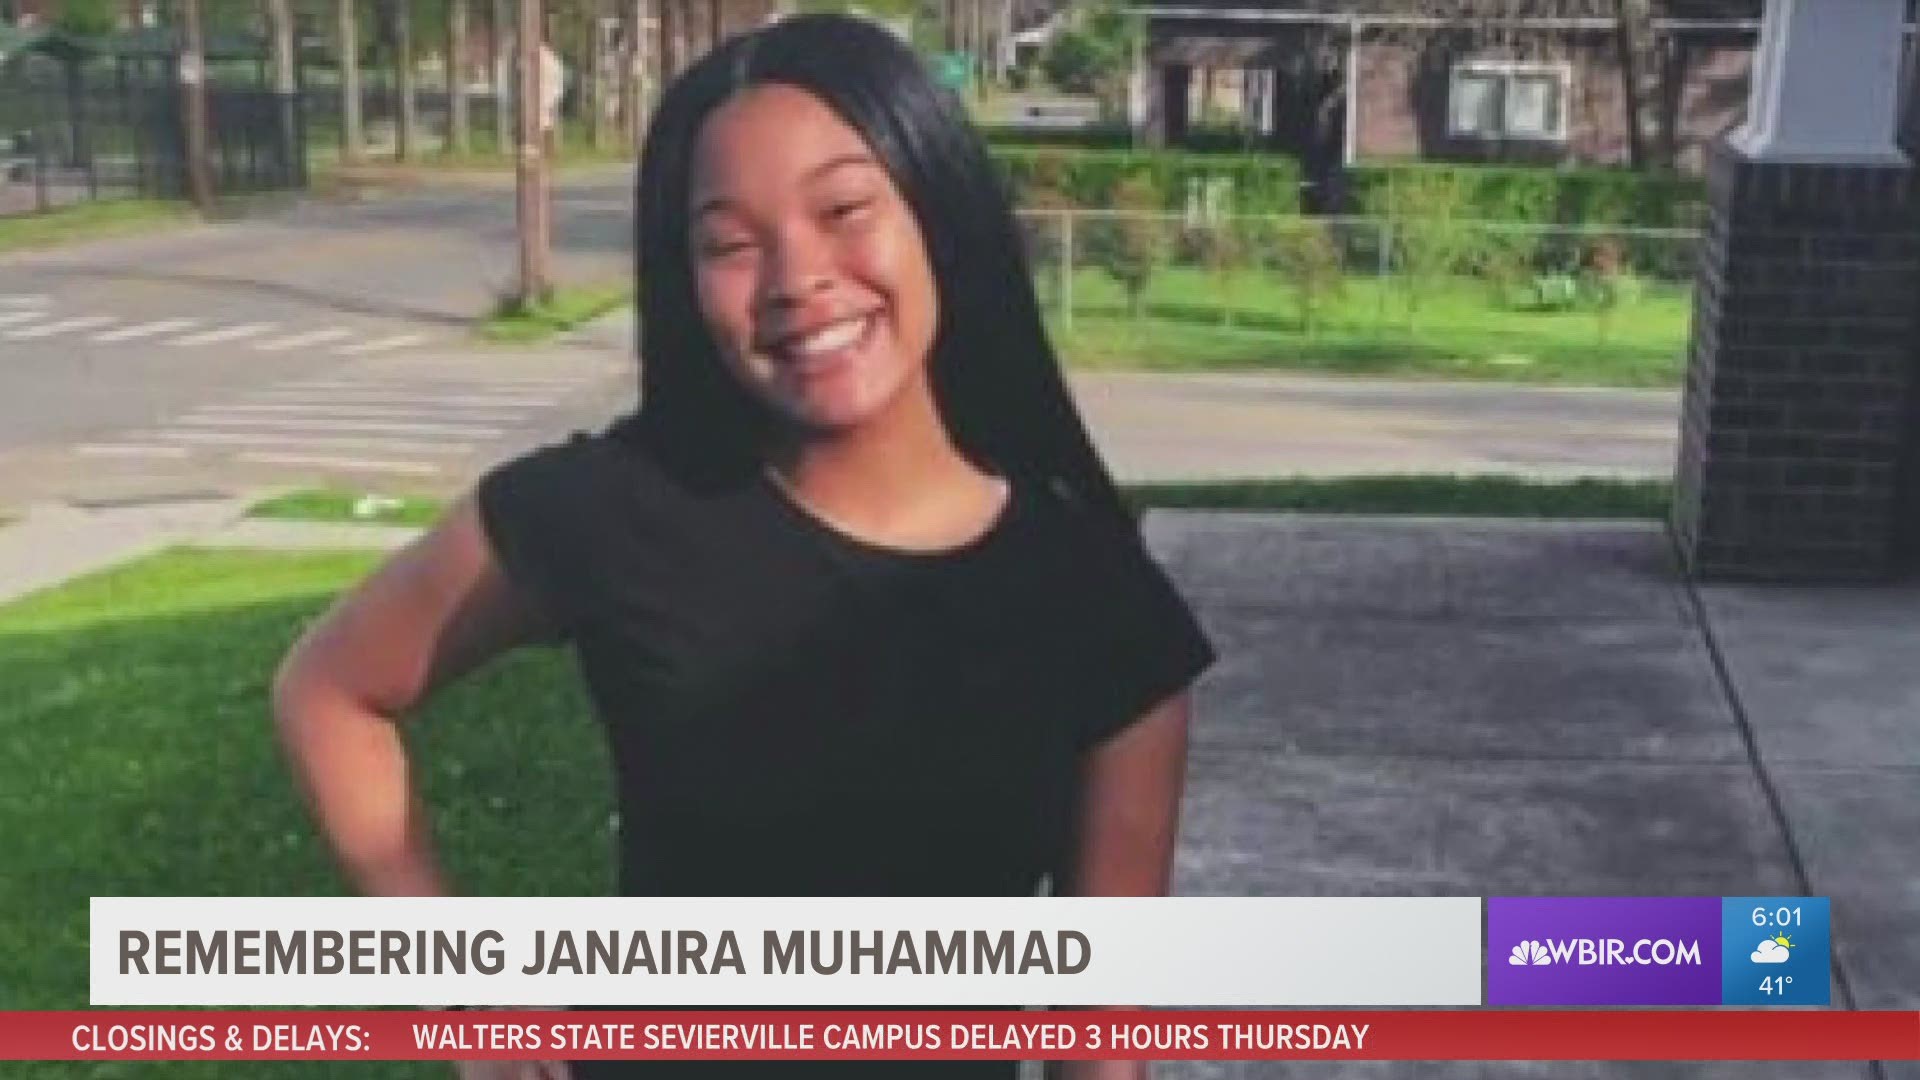 Janaira was a dancer, basketball and volleyball player. She was an involved student at Austin-East High School before she was killed Tuesday night.